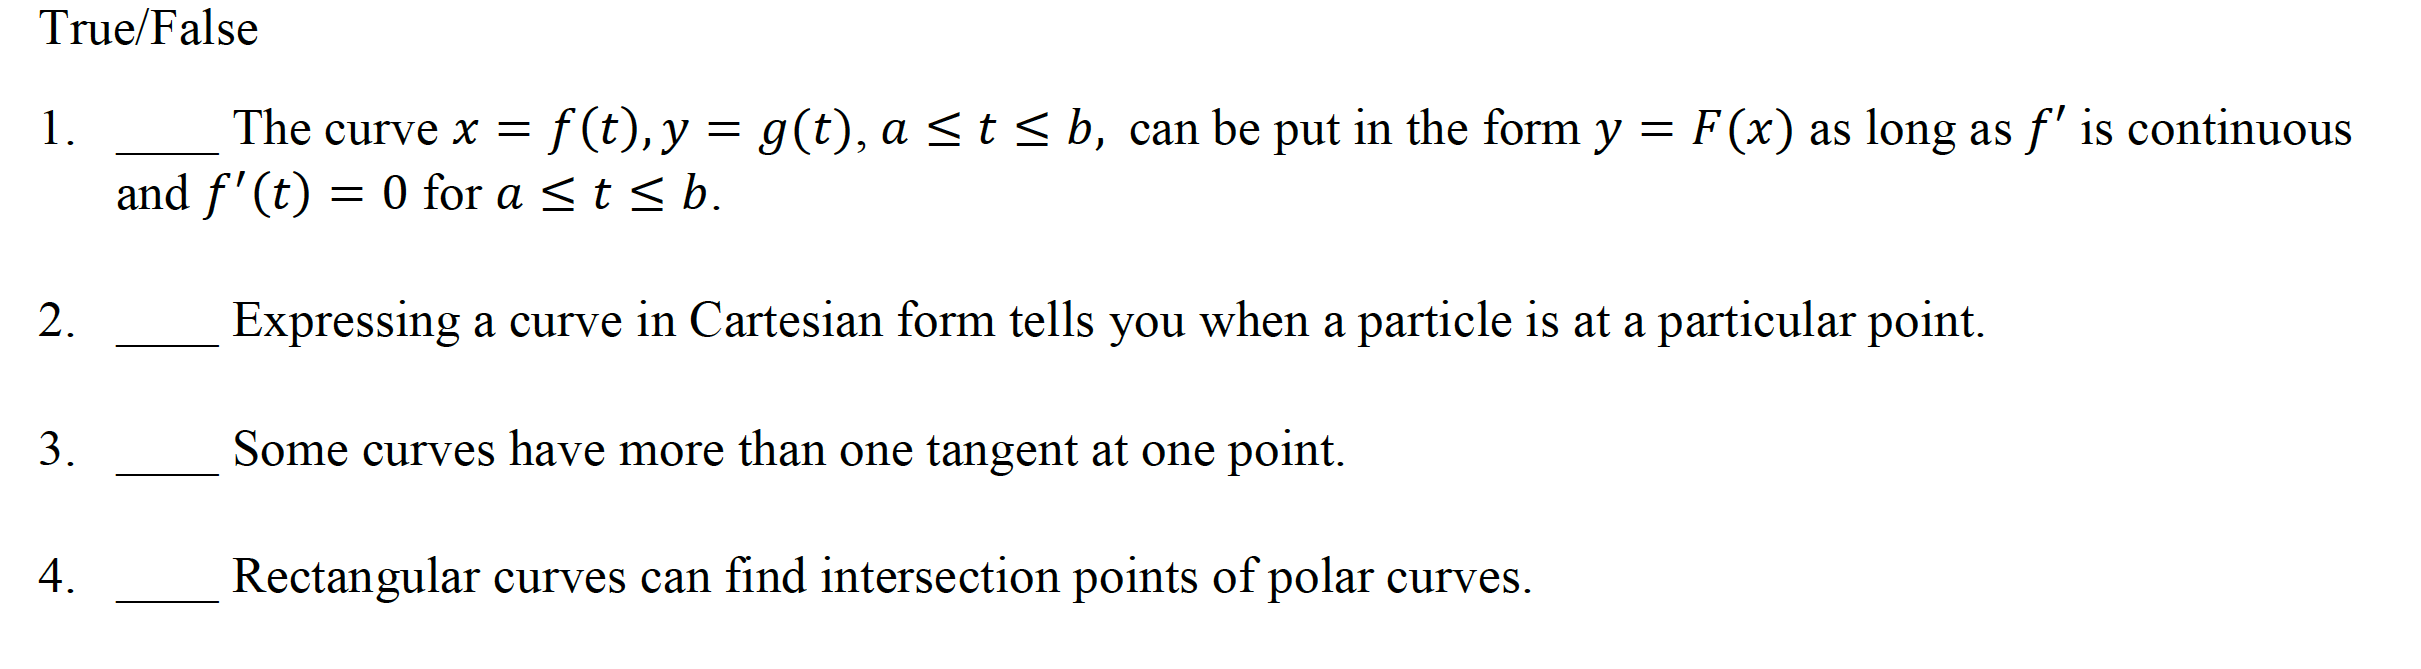 True/False
The curve x = f (t), y = g(t), a <t< b, can be put in the form y = F(x) as long as f' is continuous
and f'(t) = 0 for a <t < b.
1.
2.
Expressing a curve in Cartesian form tells you when a particle is at a particular point.
3.
Some curves have more than one tangent at one point.
4.
Rectangular curves can find intersection points of polar curves.
